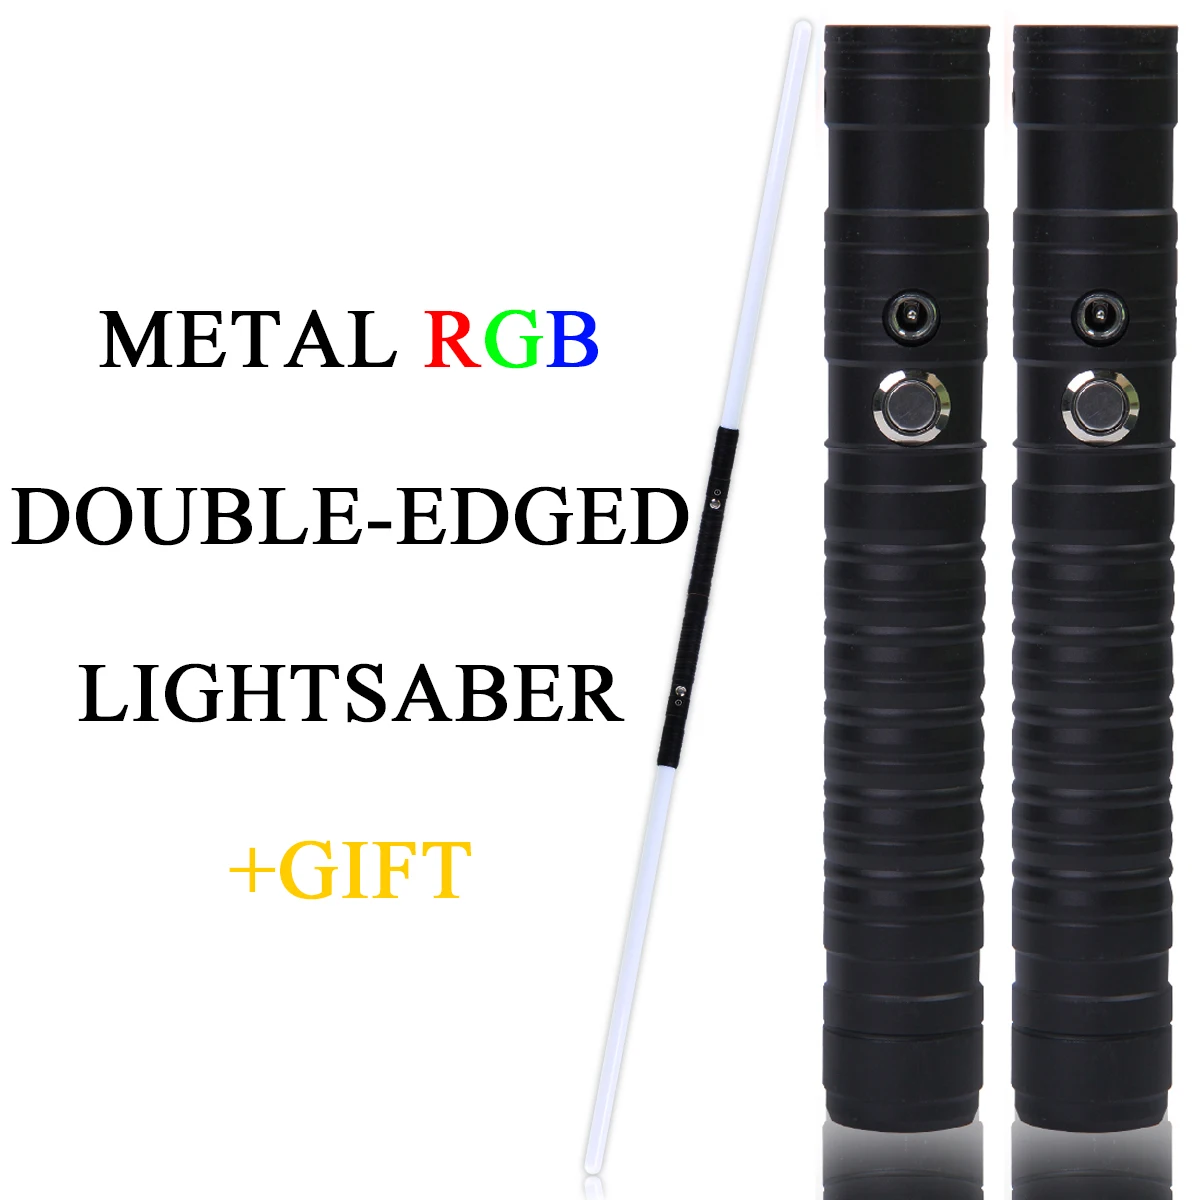 

Double-edged Lightsaber RGB 14 Color Change LED Laser Sword Two In One Switchable Saber Sound Full Metal Handle Cosplay Gift